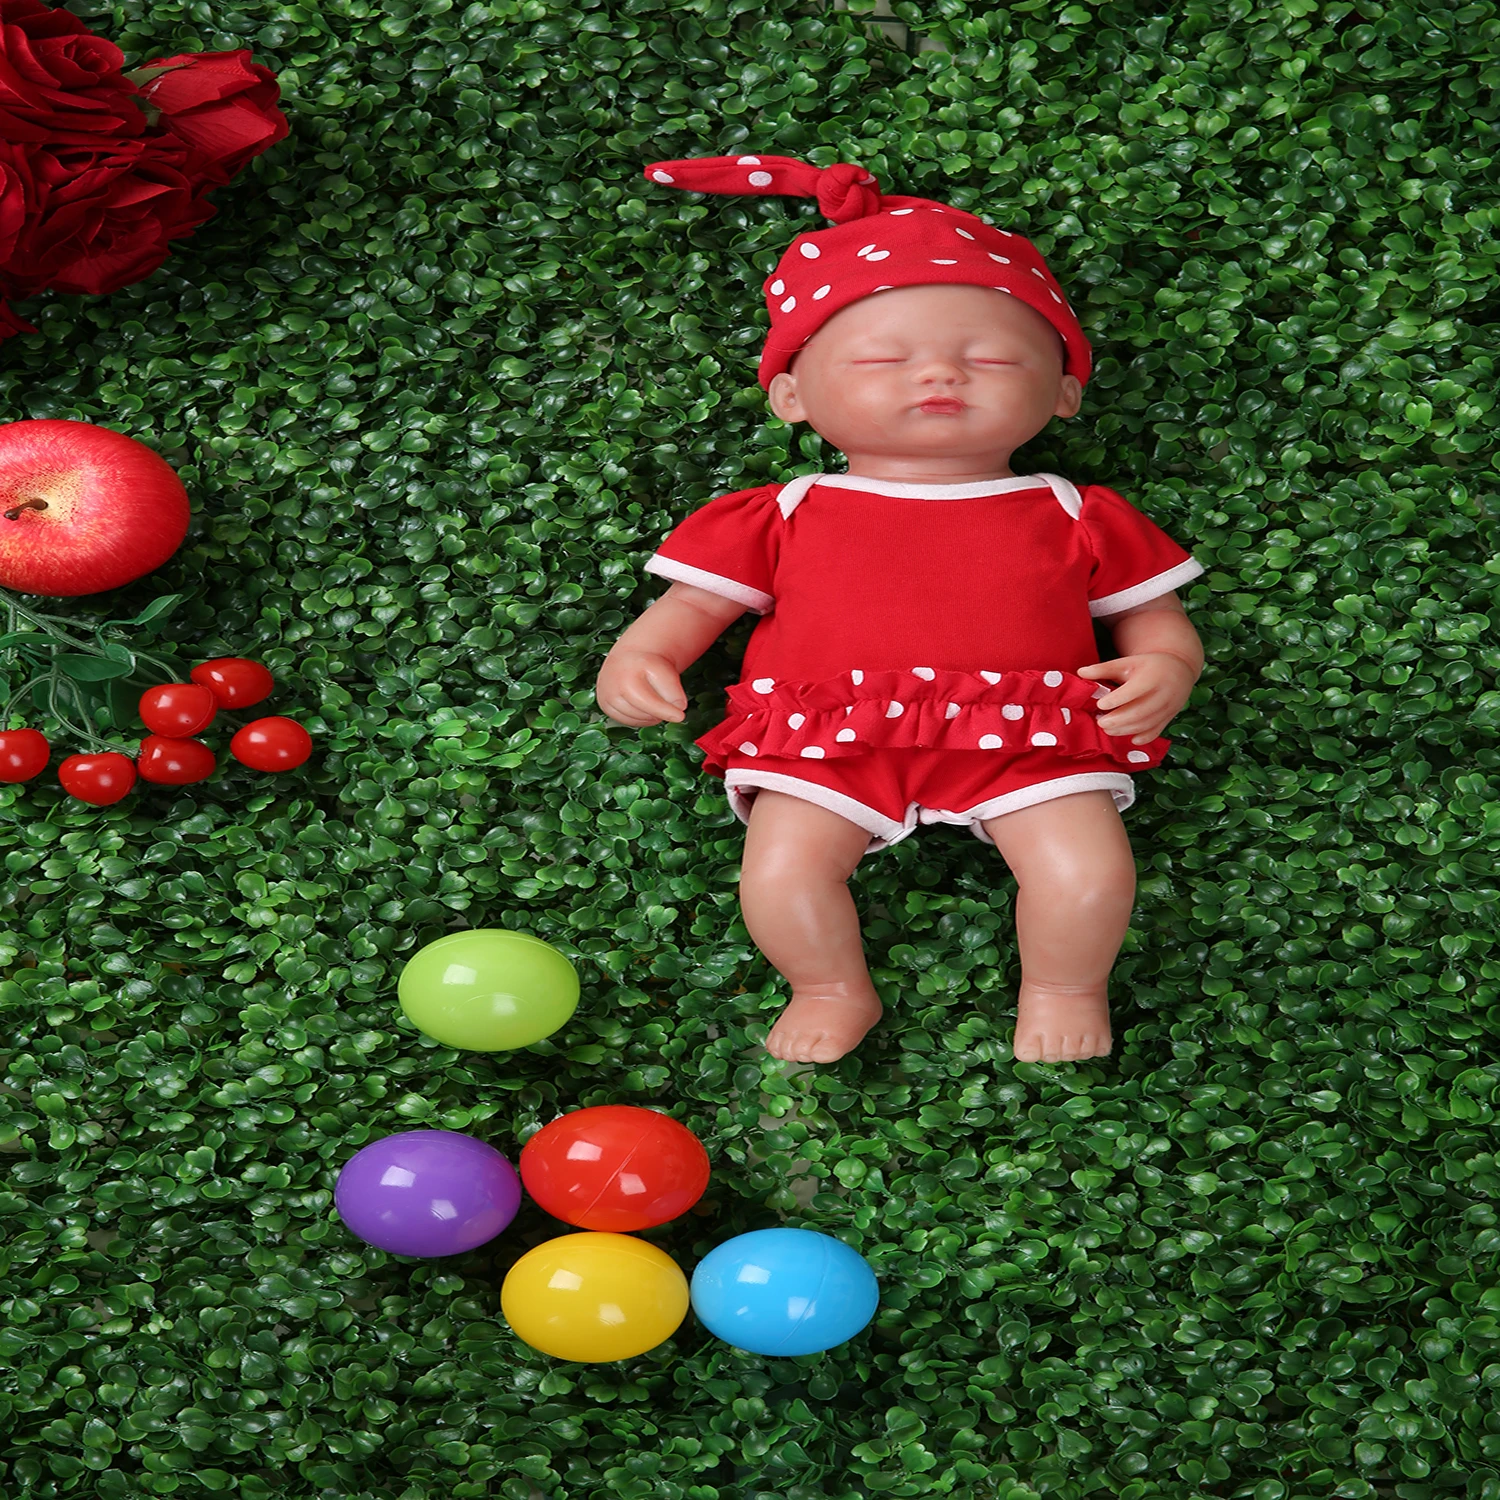 

IVITA WG1509 38cm 1.8kg Girl Eyes Closed High Quality Full Body Silicone Reborn Dolls Babies Born Alive Toys with Clothes